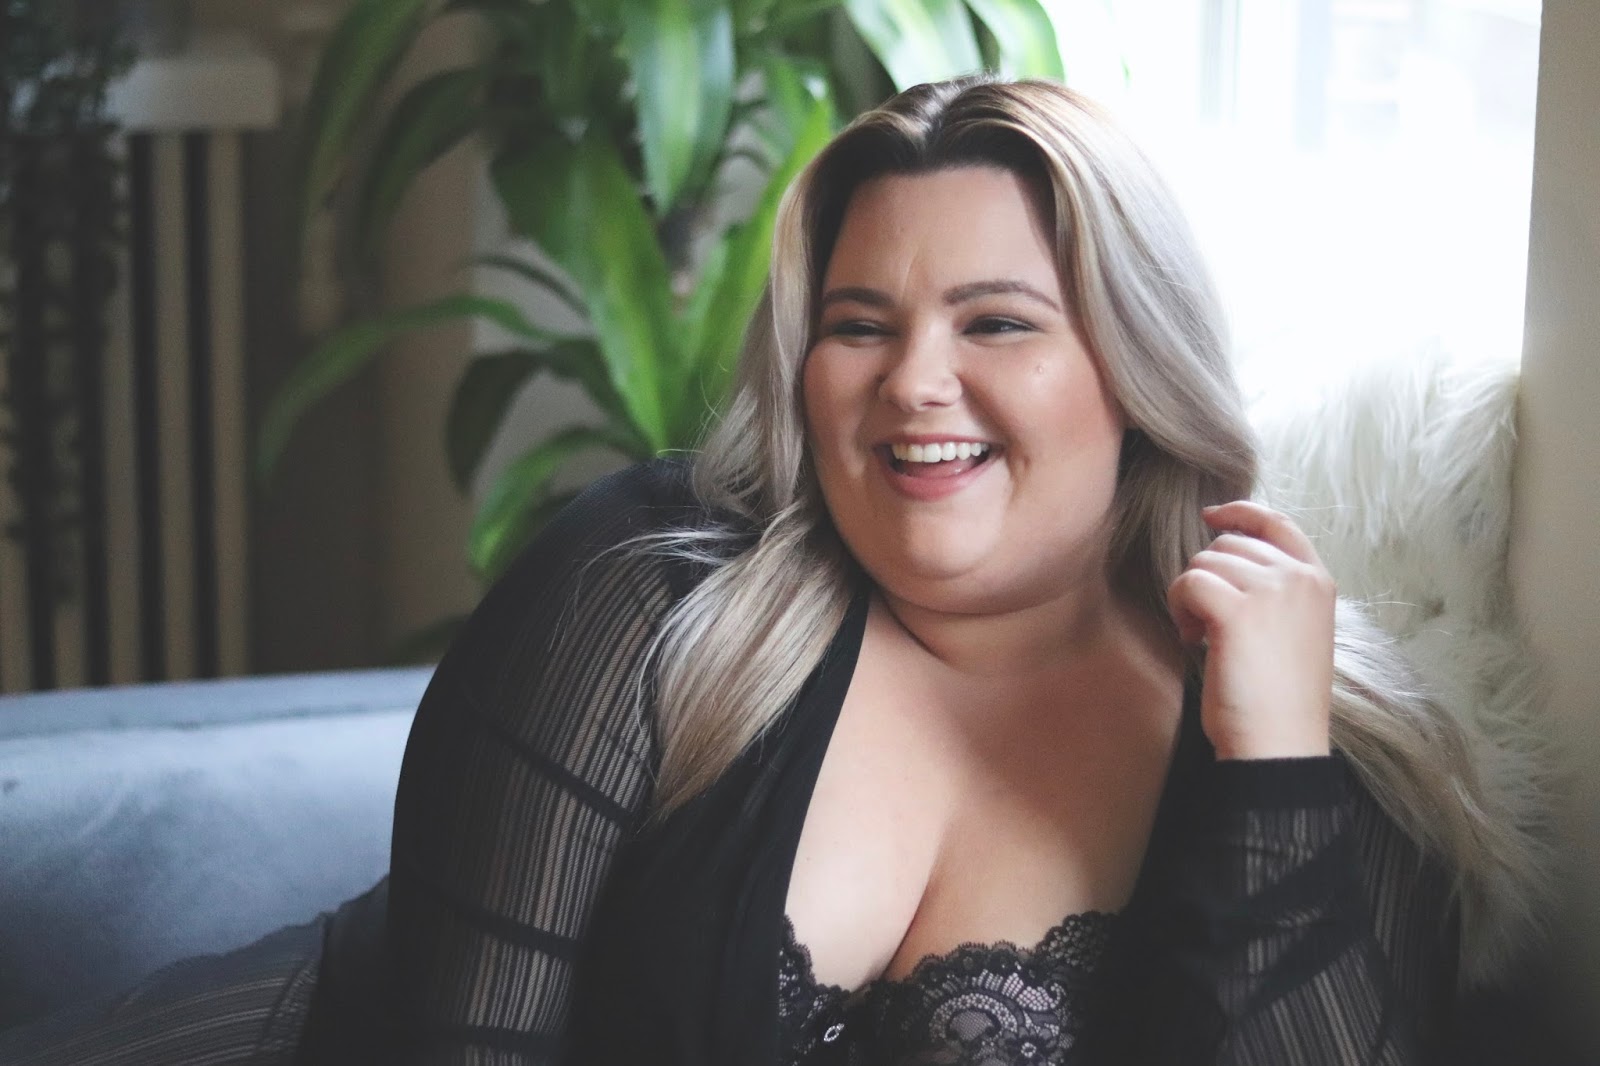 curvy couture, plus size bras, extended sizes, large bras, torrid bras, comfortable plus size bras, curvy couture intimates, plus size lingerie, Chicago fashion, curves and confidence, fashion to figure, plus size fashion